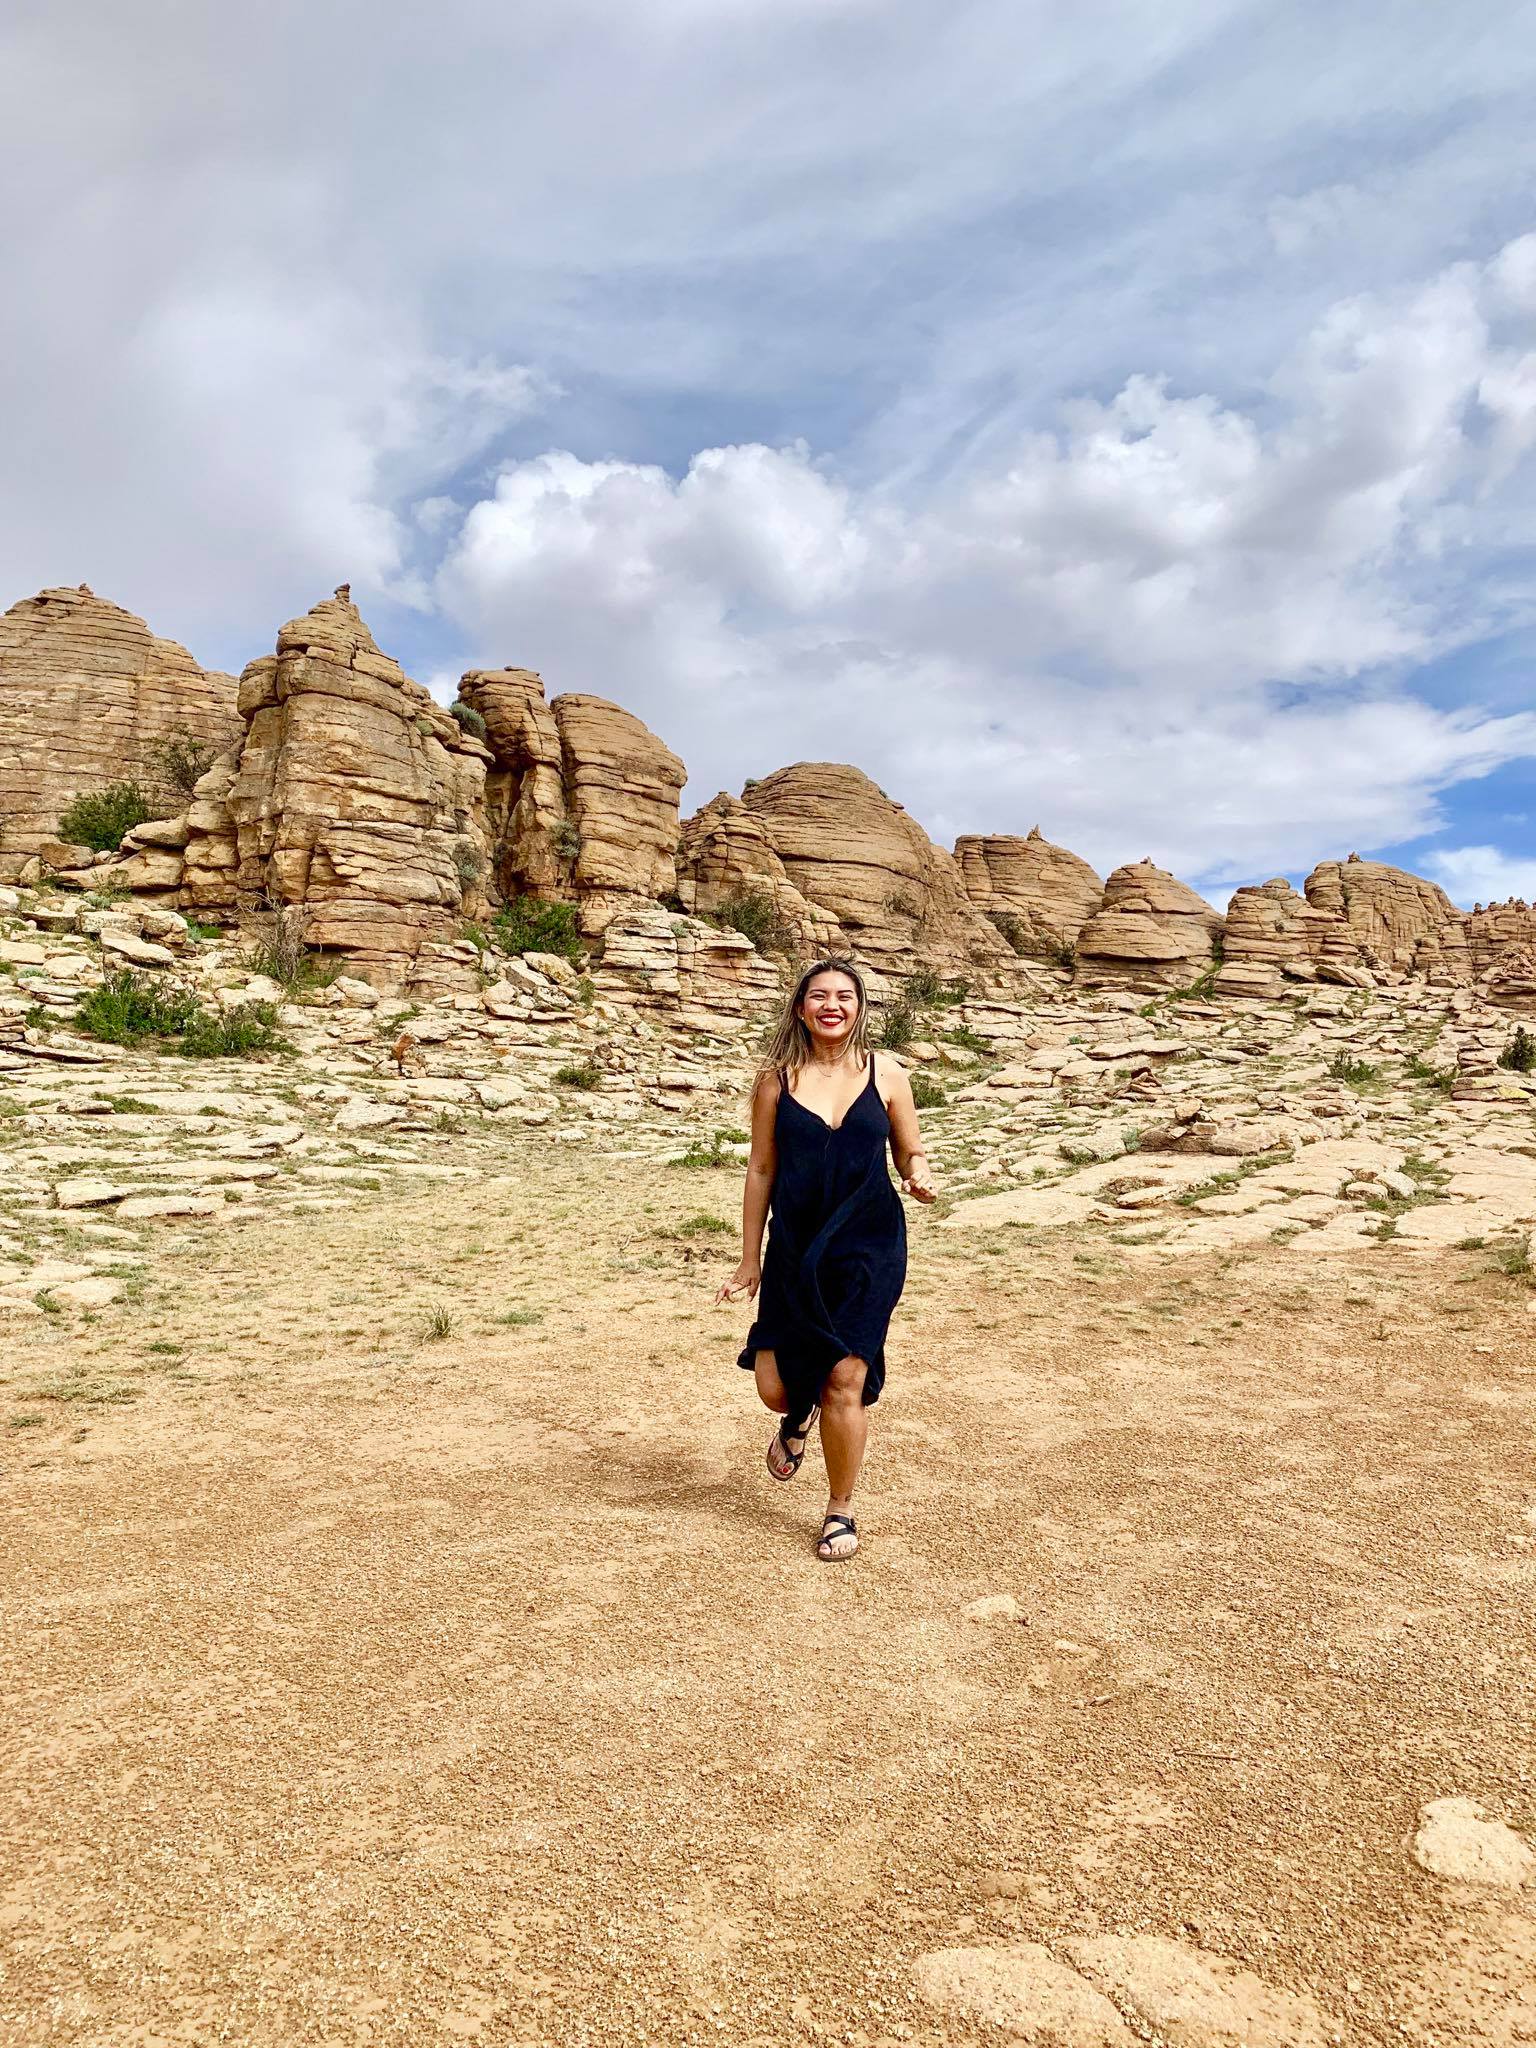 Kach Solo Travels in 2019 One of the hikes during my trip in Gobi desert6.jpg